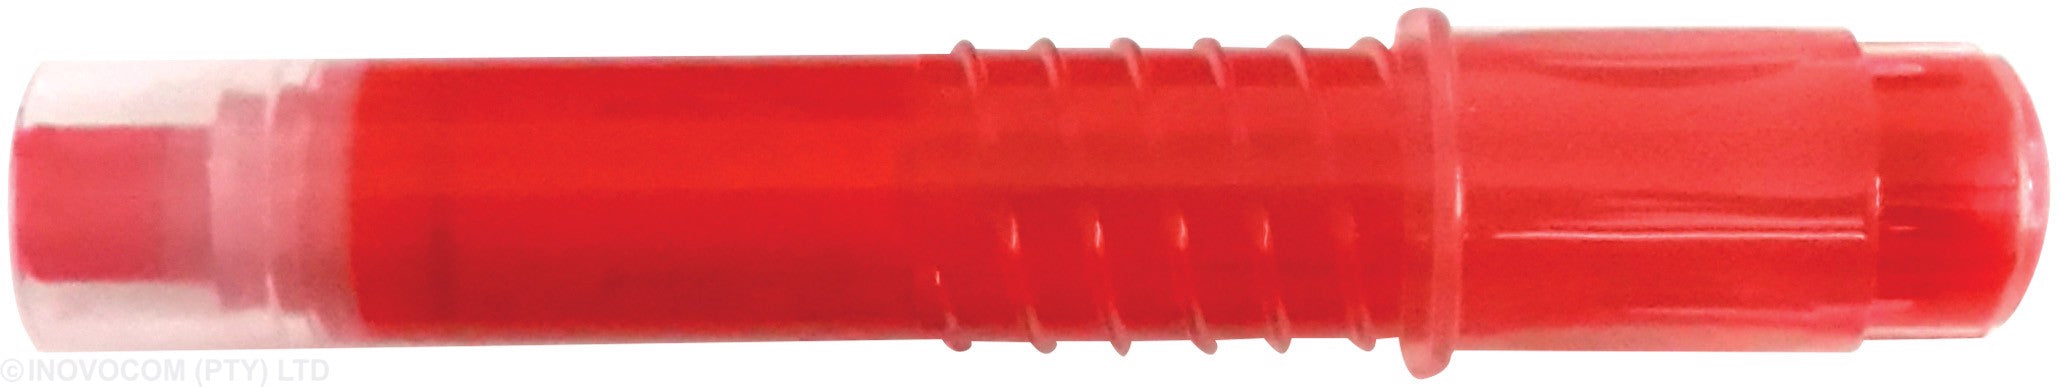 Pilot Marker Refill For UF And EF Whiteboard Markers Red